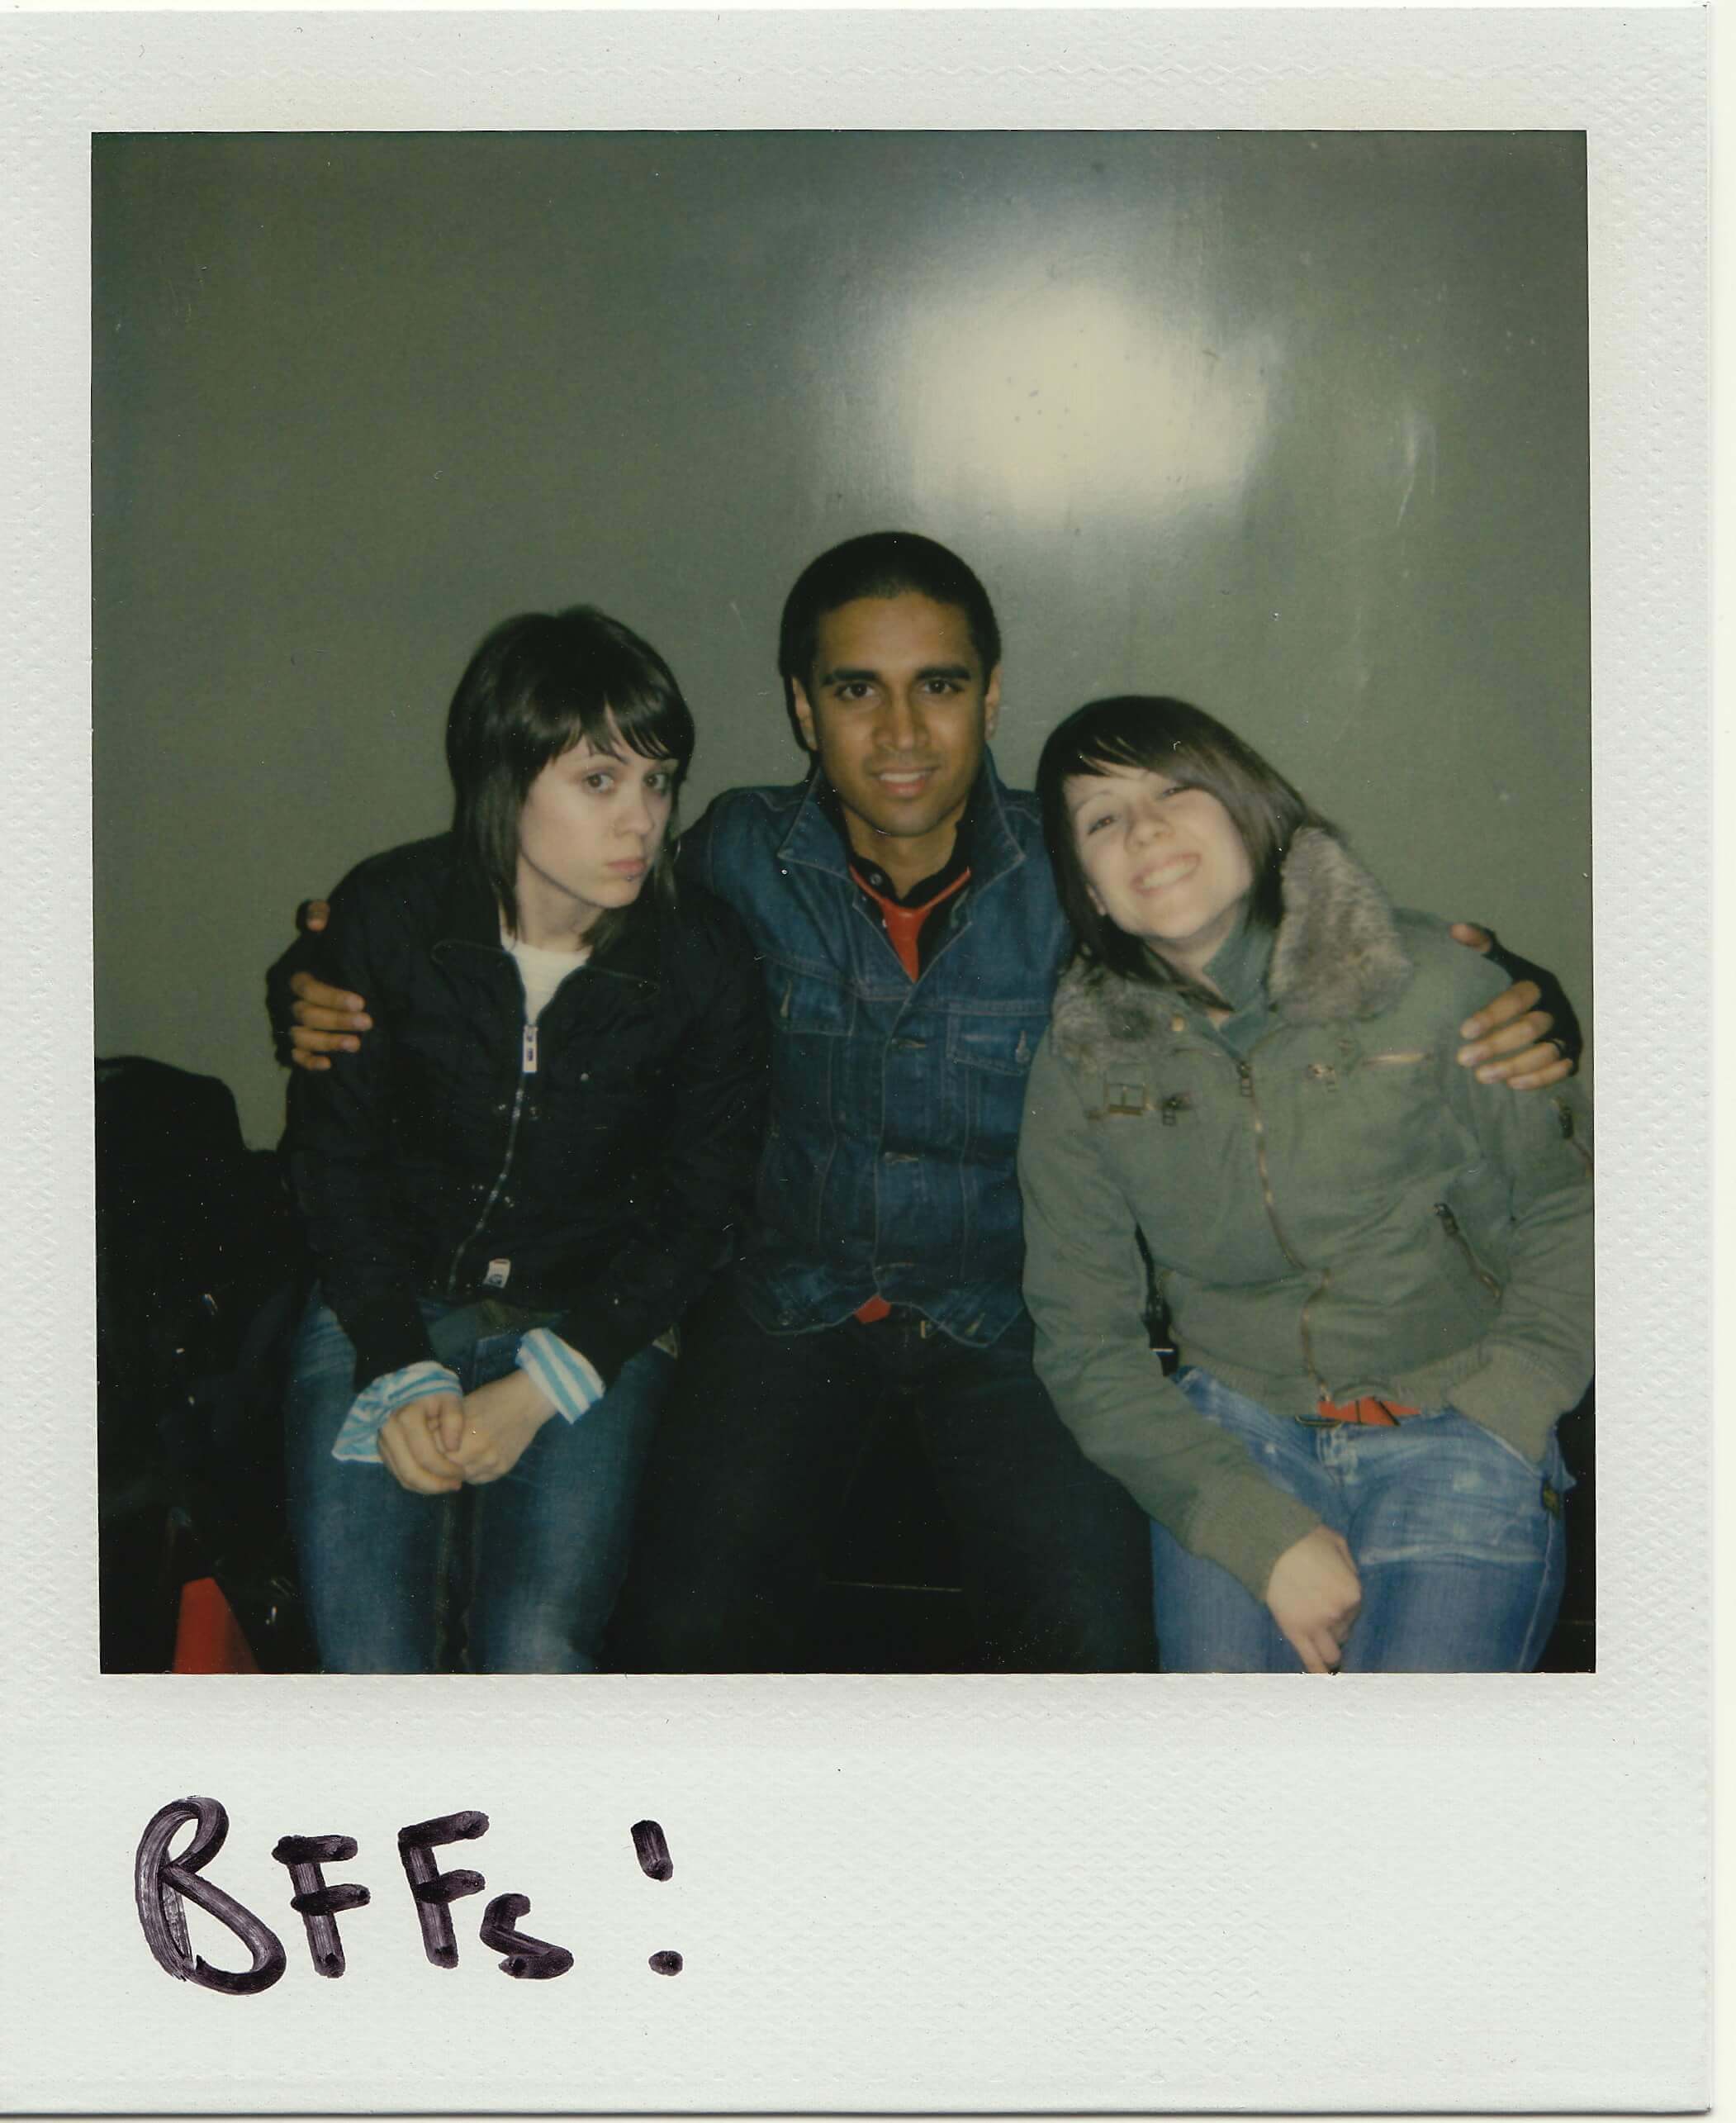 A Polaroid photo of Vivek with her arms around Tegan and Sara, with a handwritten caption: “BFFs!”